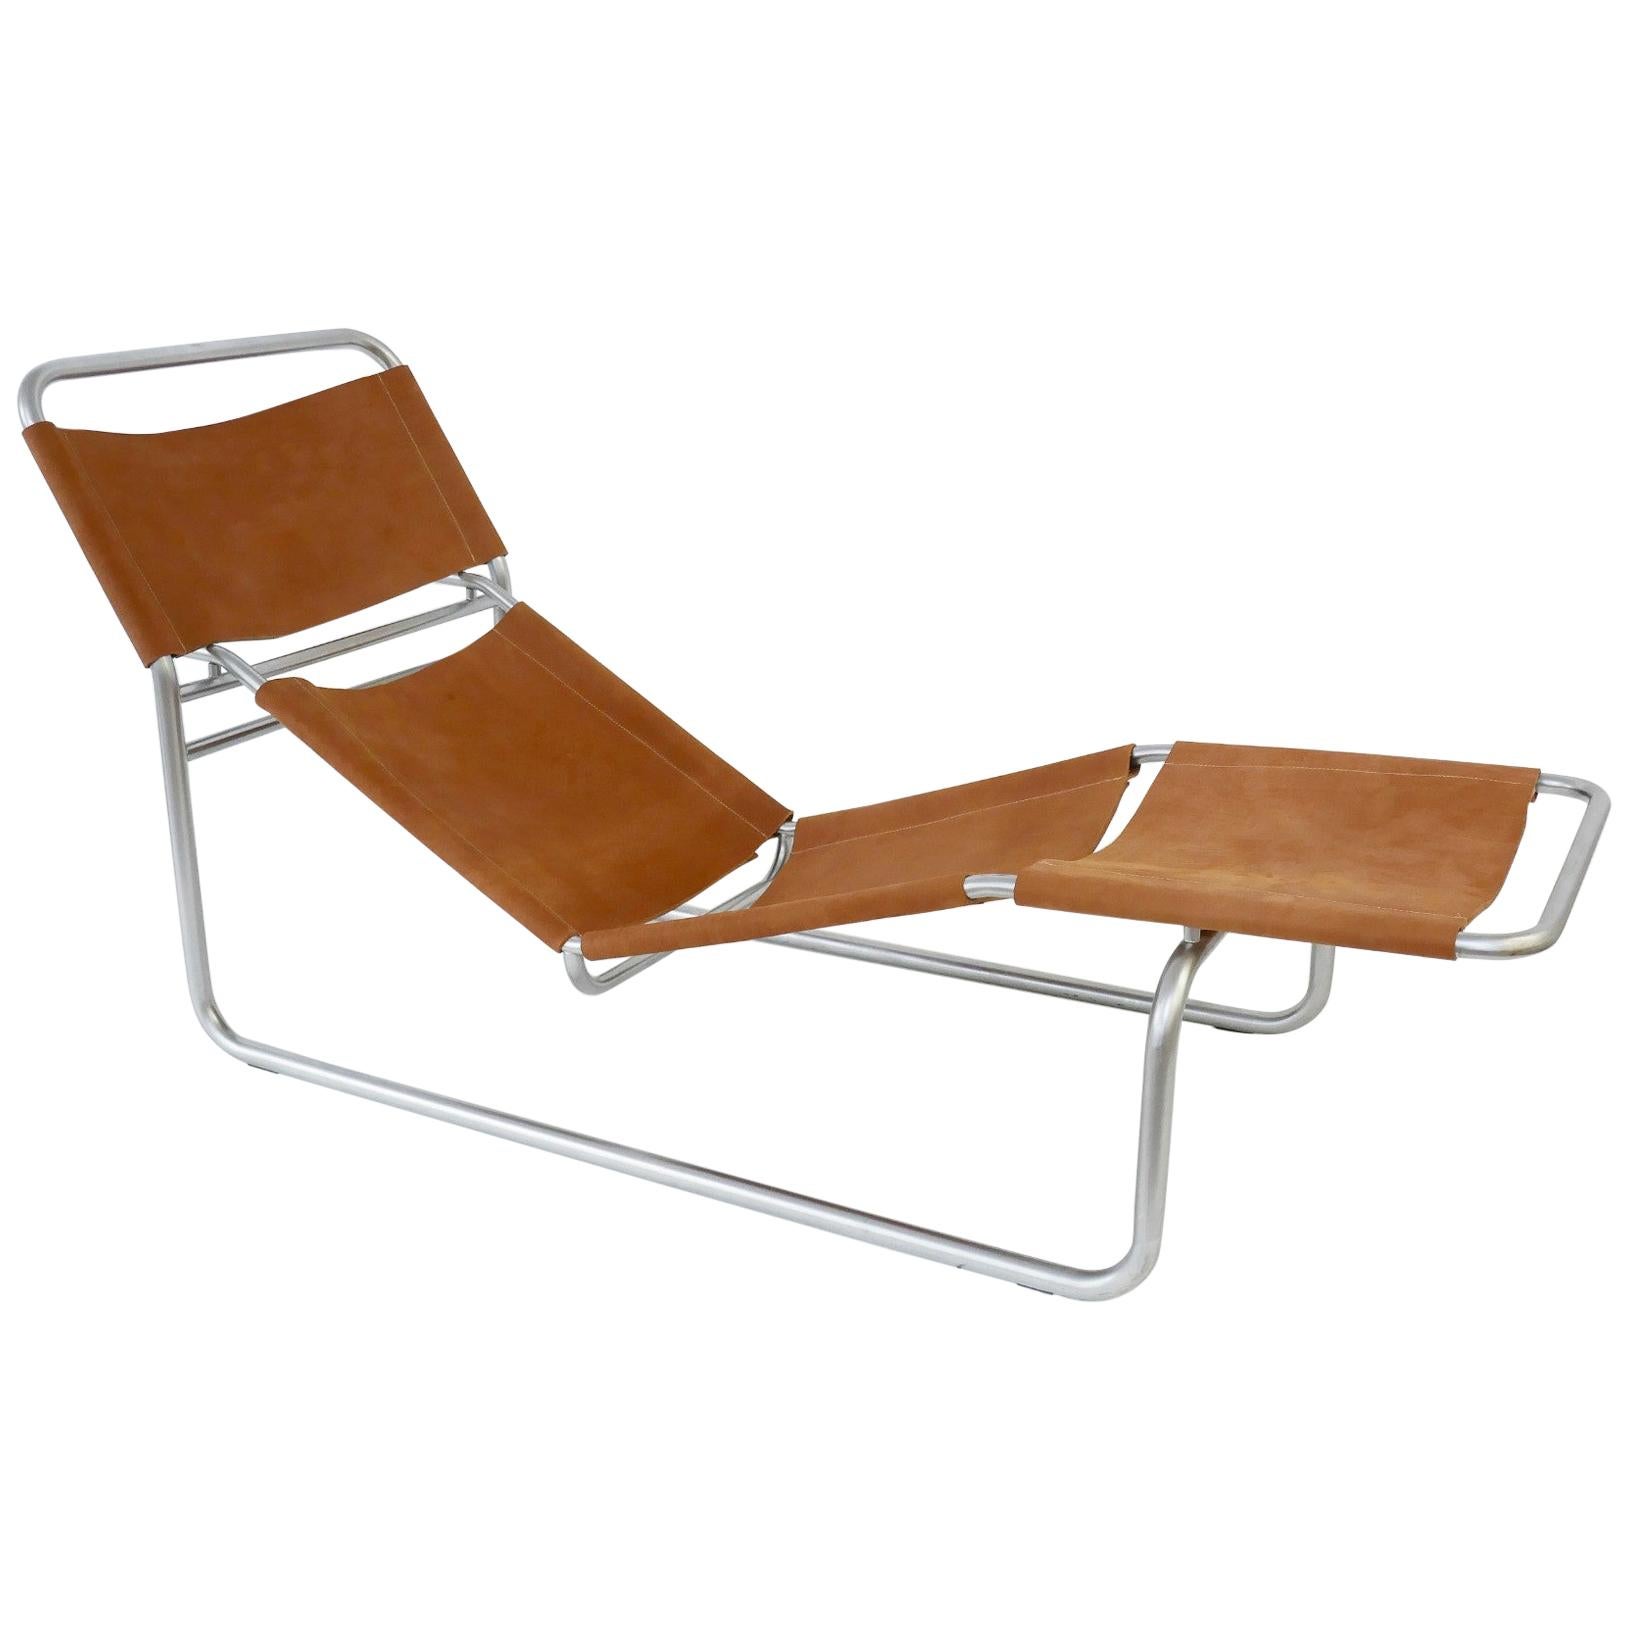 Chrome and Leather Lounge Chair